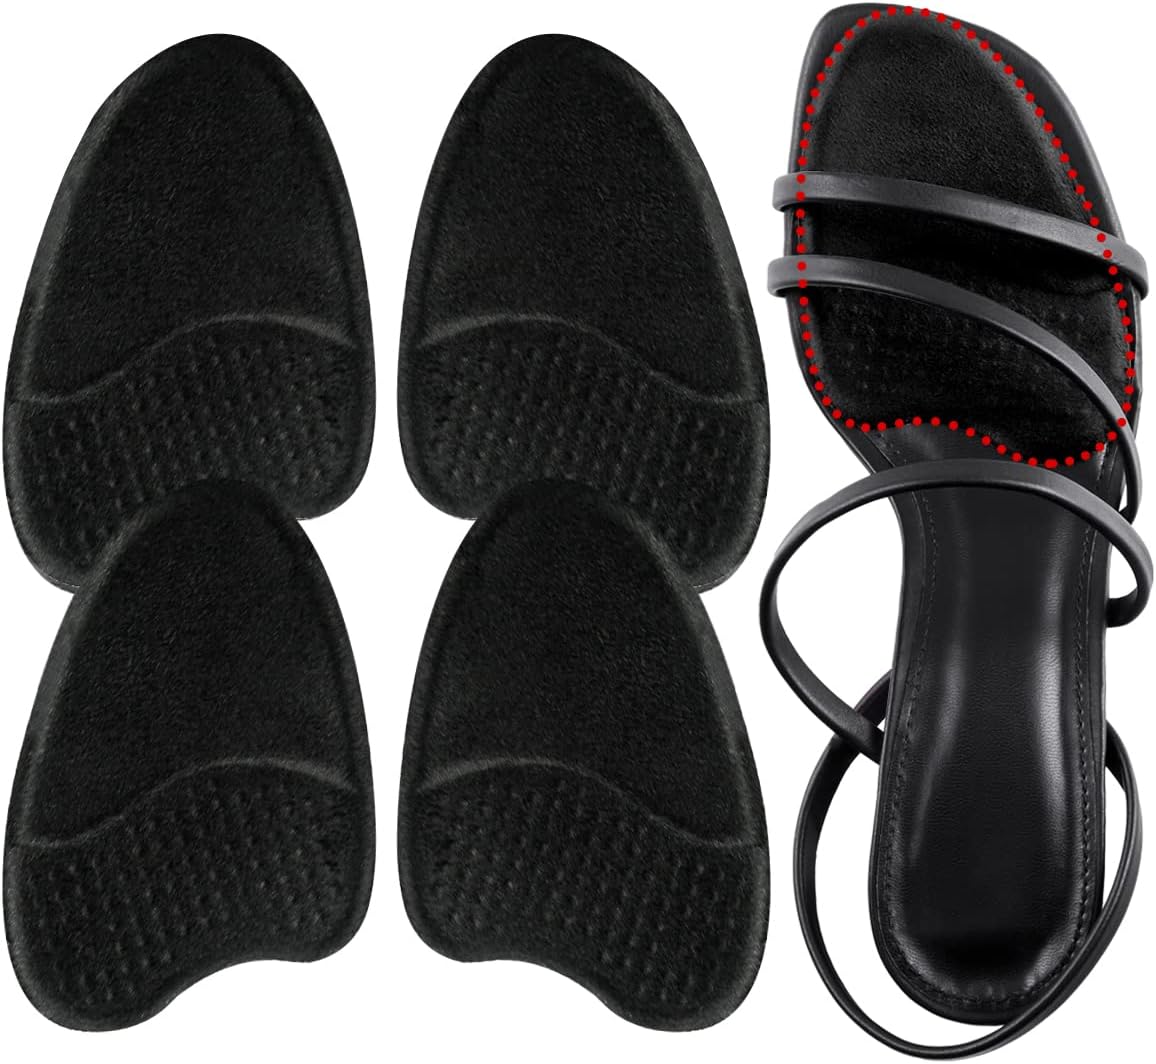 Metatarsal Shoe Insoles Relieve and Prevent Ball of [...]